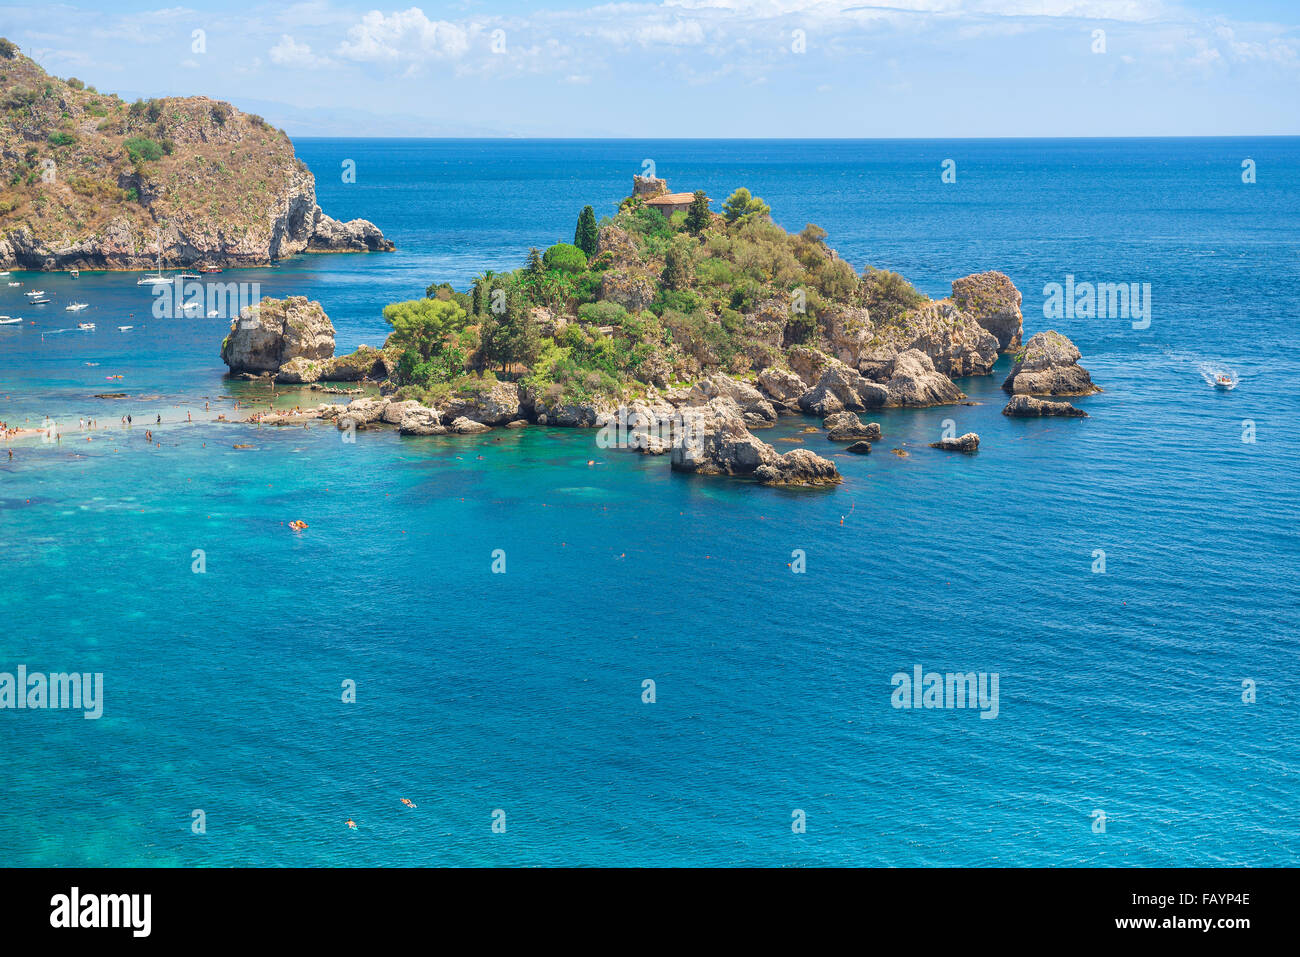 Sicily island, view in summer of the small island known as Isola Bella, sited next to the beach of Mazzaro, below the resort town of Taormina, Sicily. Stock Photo